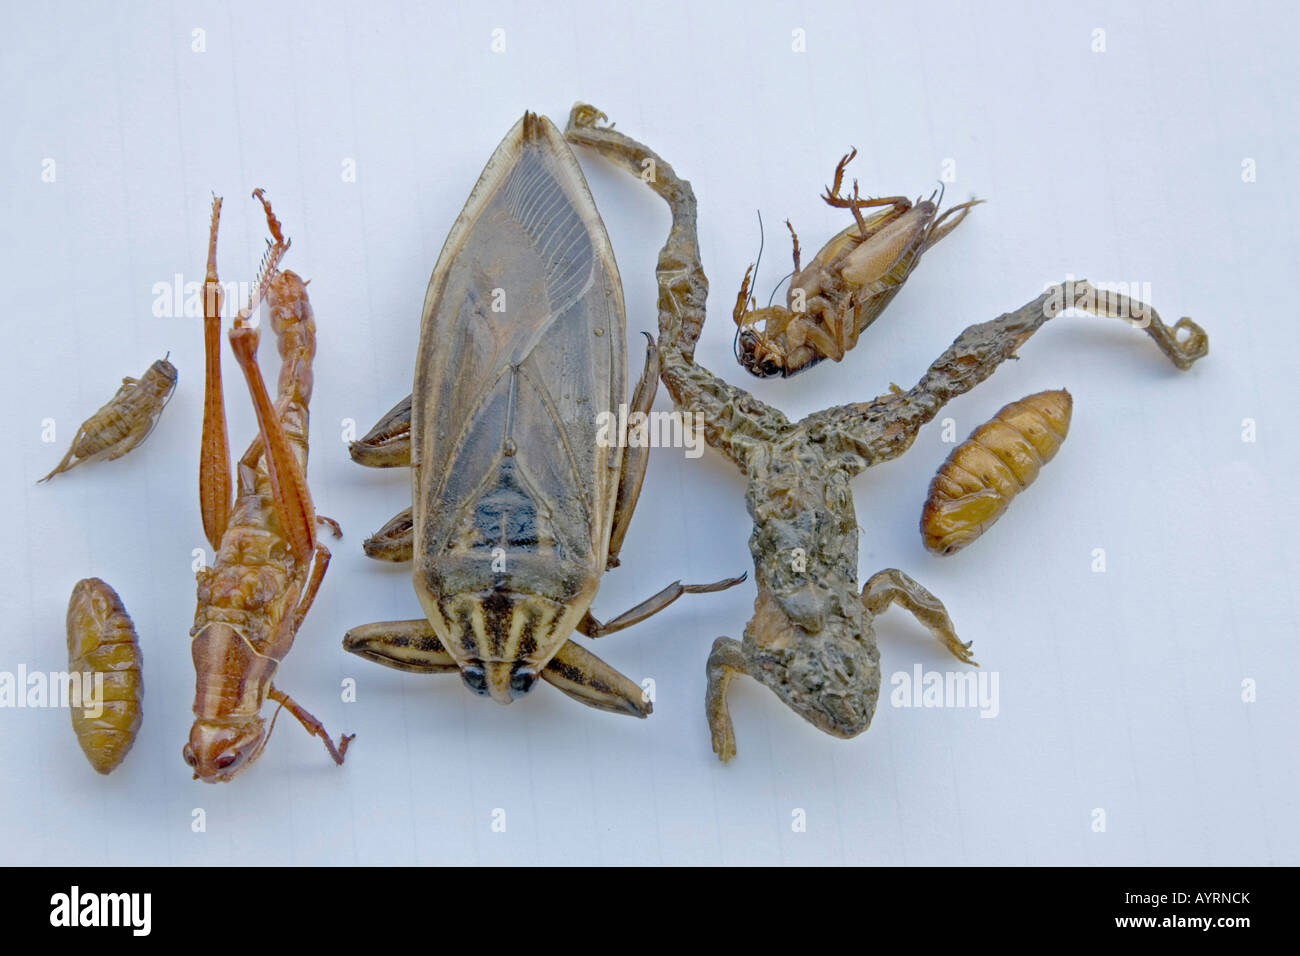 Deep-fried frog, water bug, cicada, grasshopper and maggots, Thai delicacies, Thailand, Southeast Asia Stock Photo